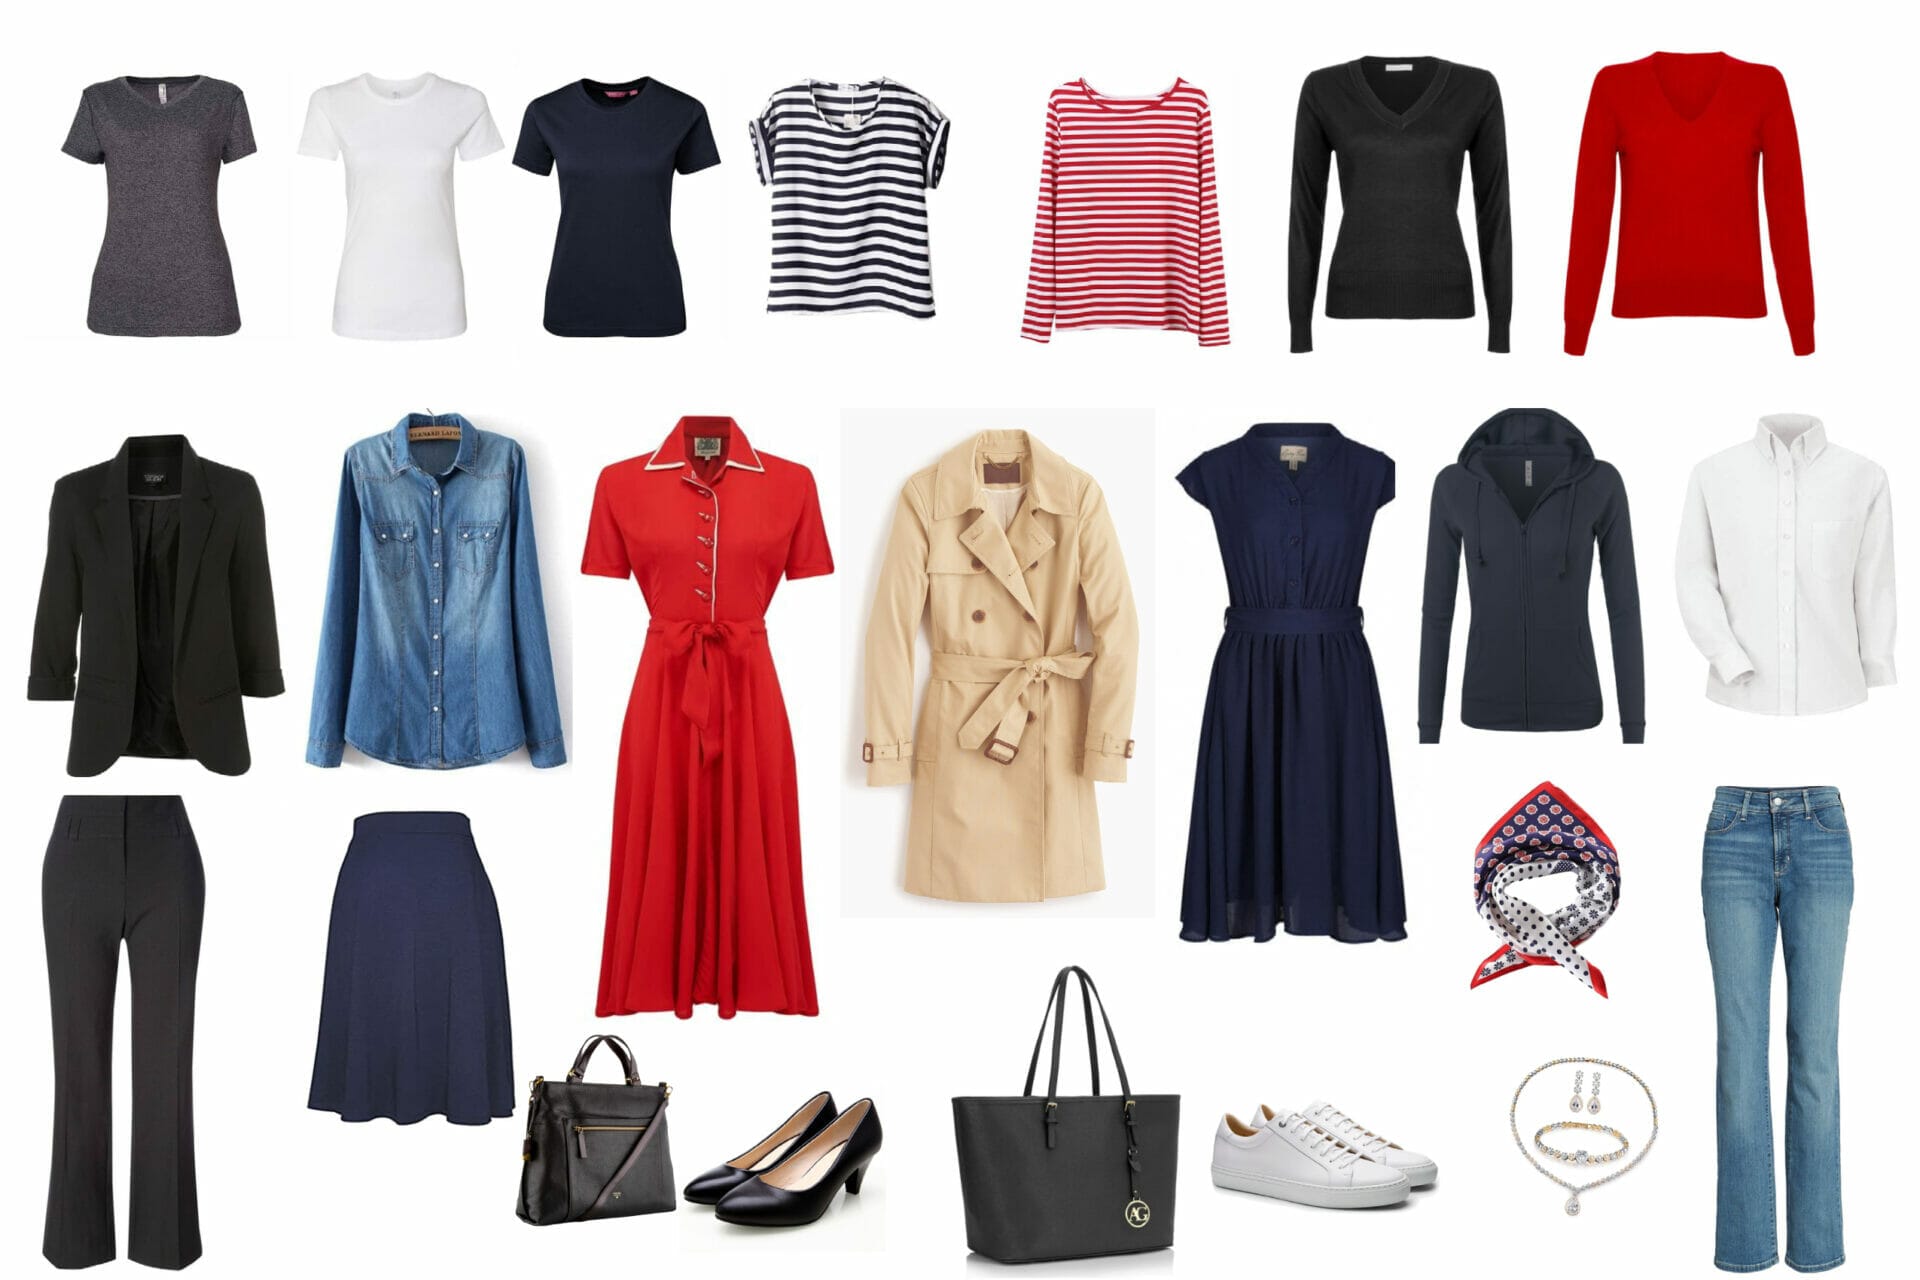 A collection of clothes suitable for a capsule wardrobe over 40